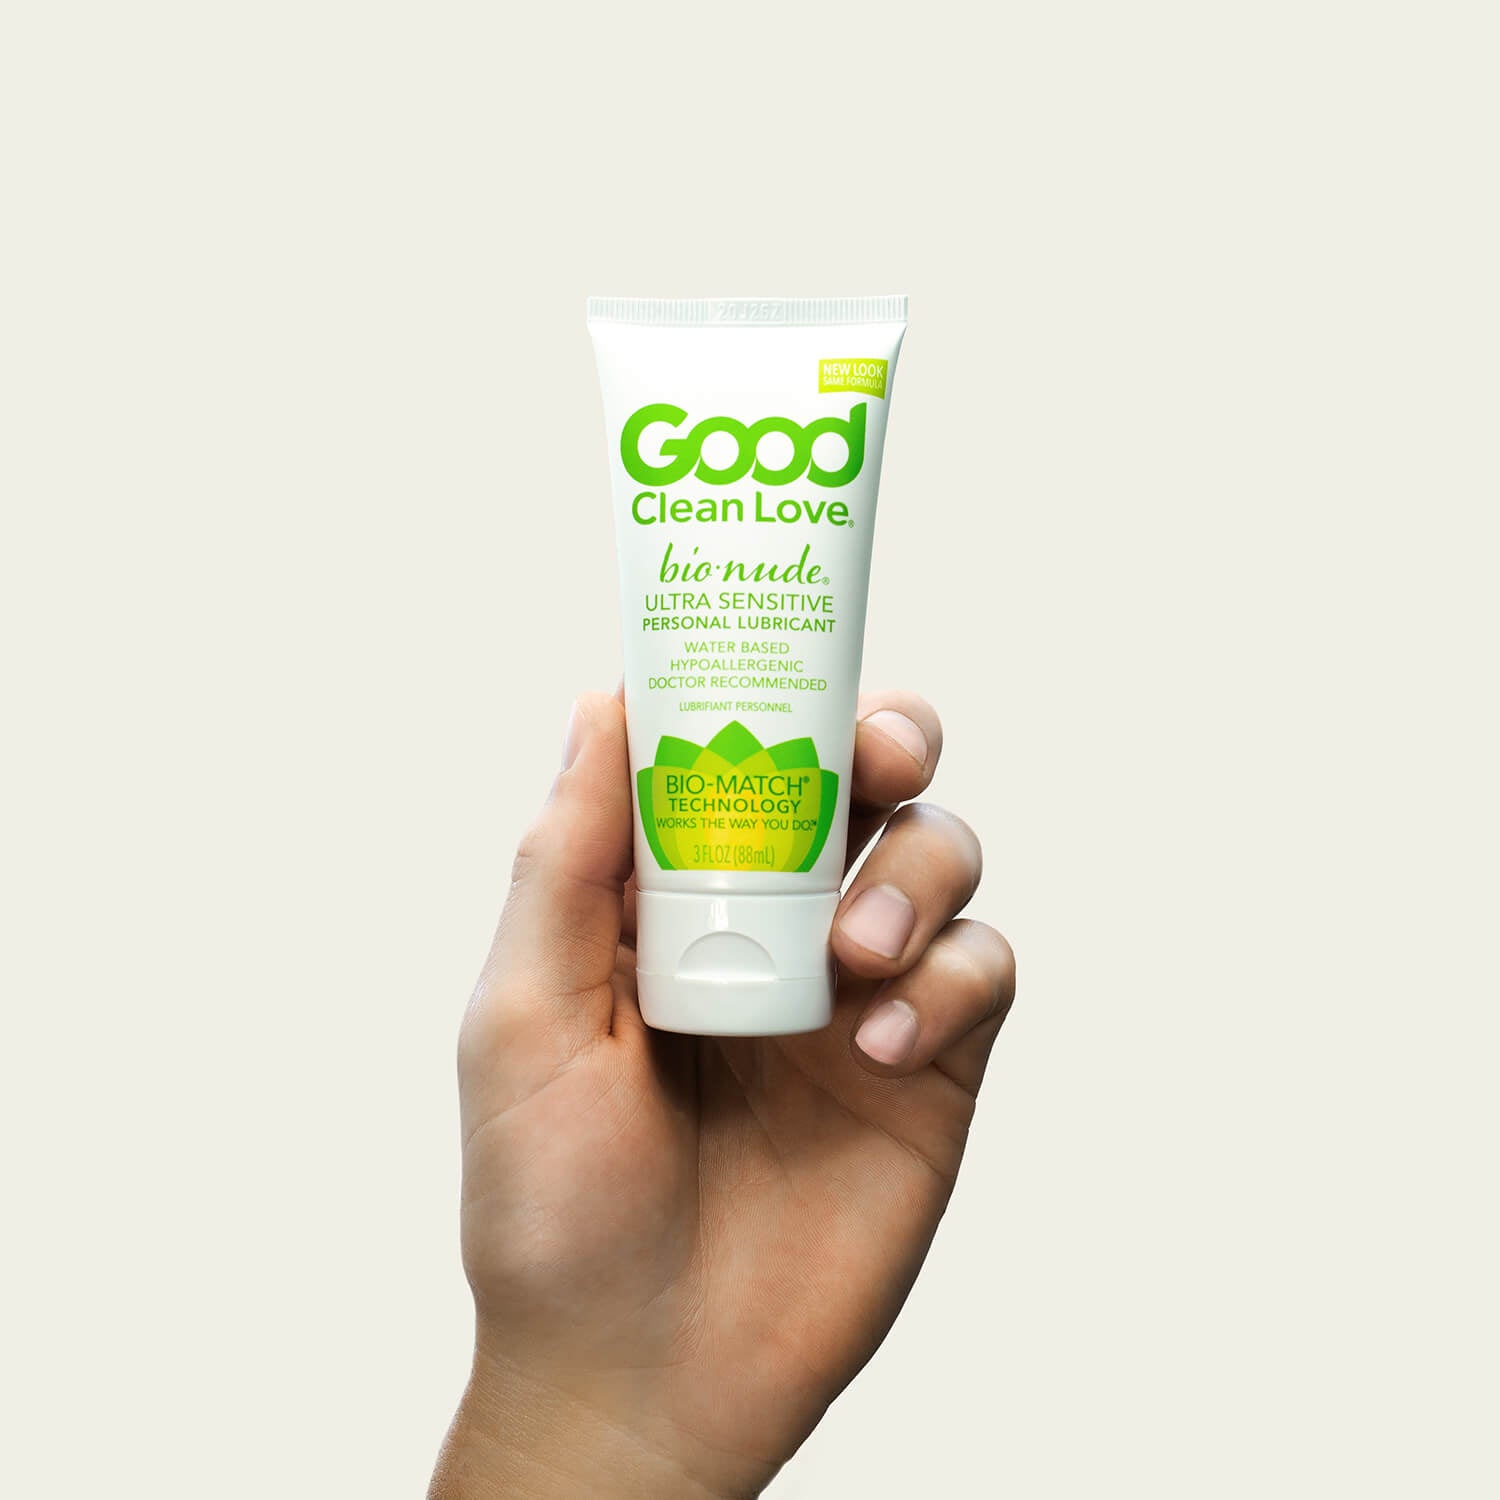 Good Clean Love Almost Naked Personal Lubricant Gel - 4oz for sale online